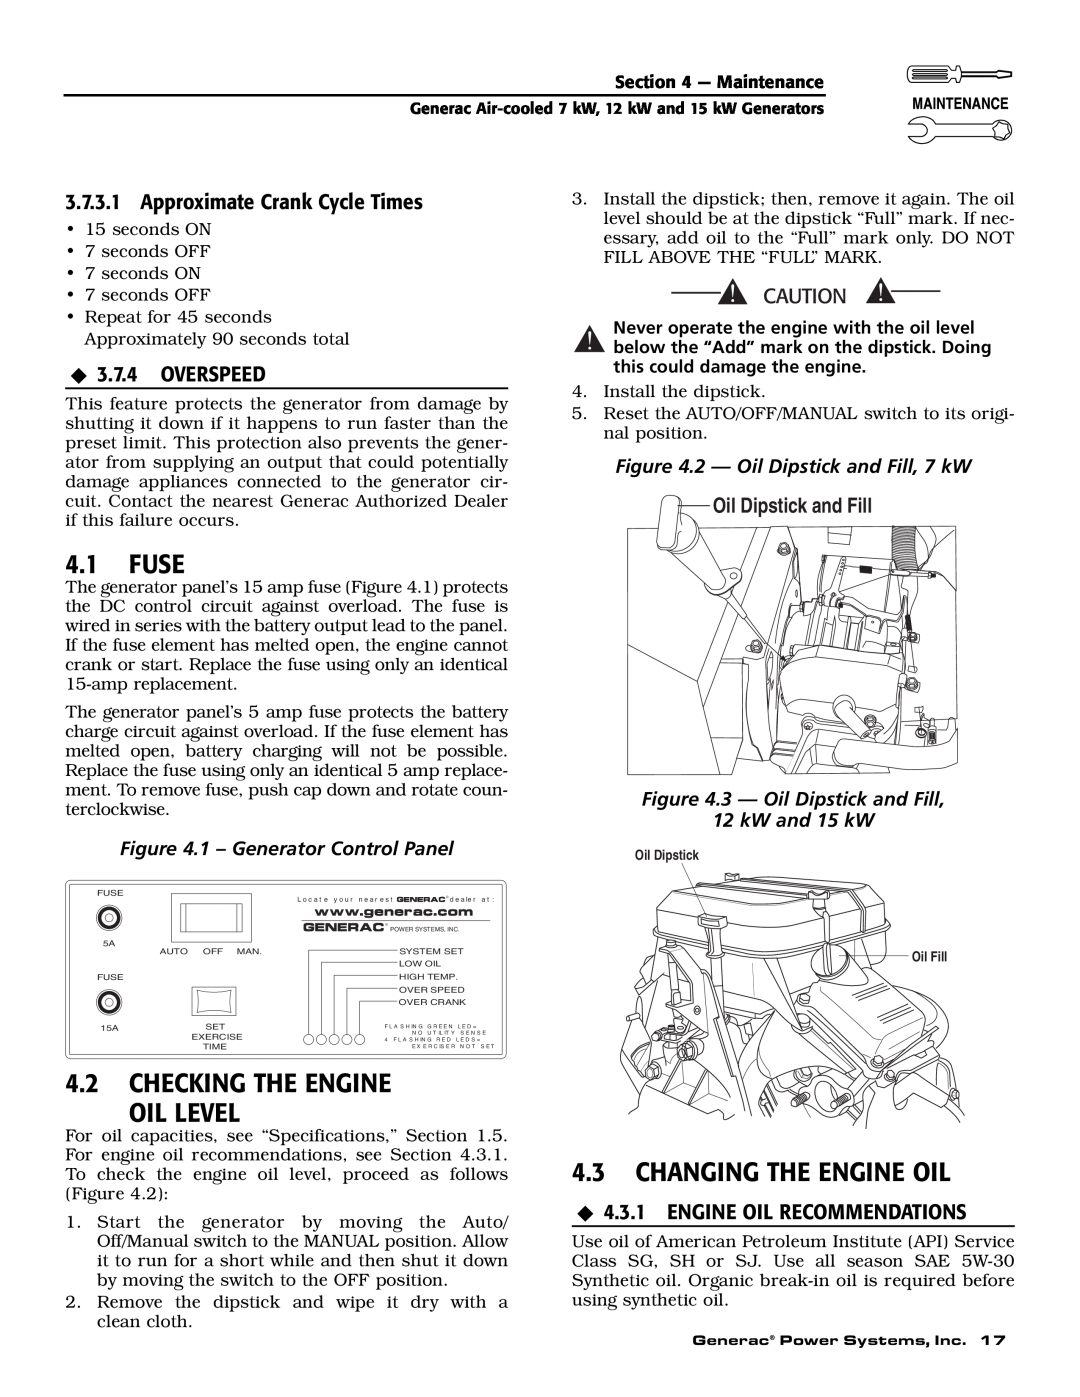 Generac 04675-3, 04673-2, 04674-2 Fuse, Checking The Engine Oil Level, Changing The Engine Oil, Oil Dipstick and Fill 